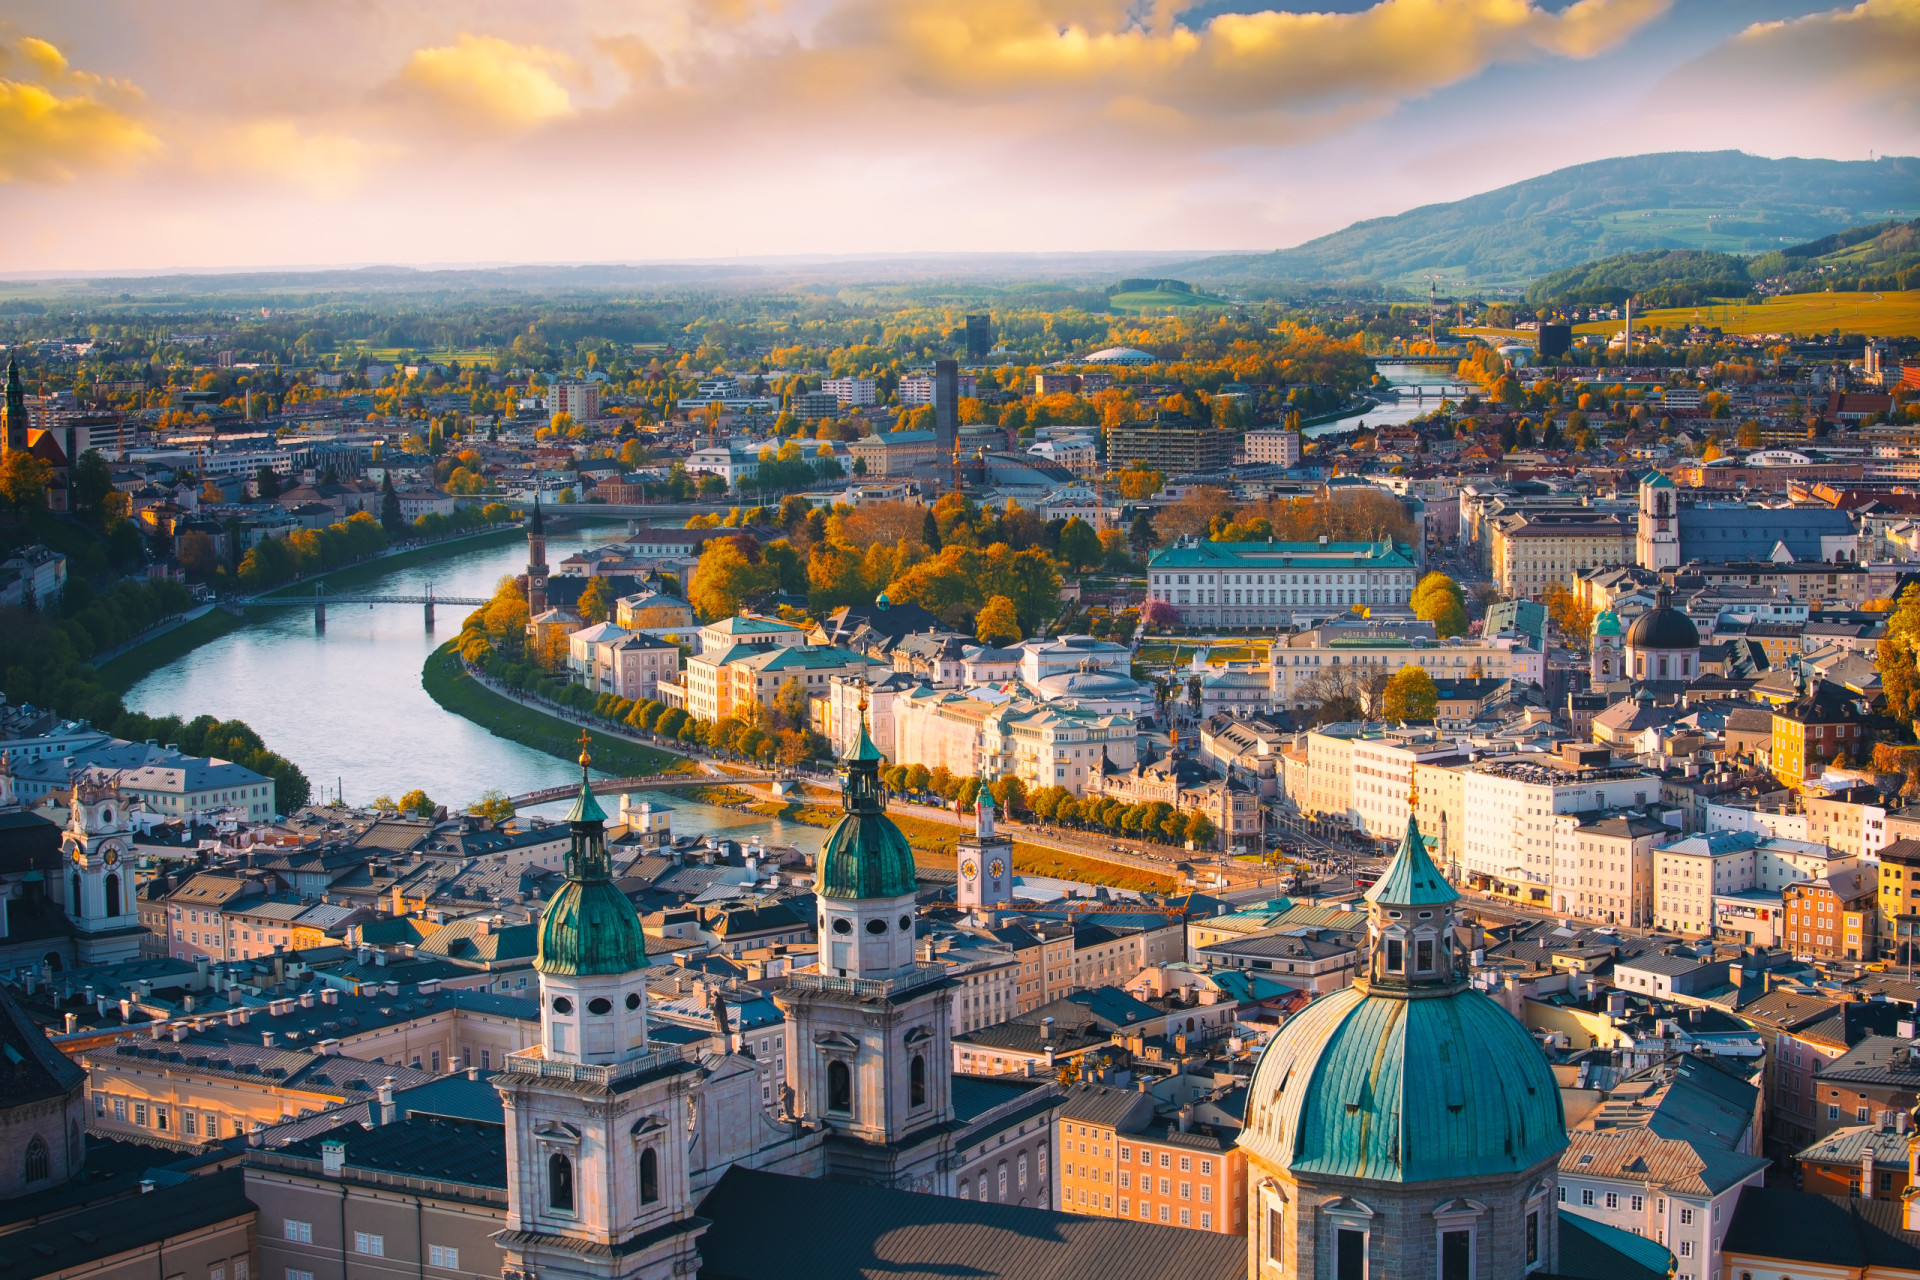 <p>Austria charges visitors a nightly accommodation tax, which differs depending on the province. In Vienna and Salzburg, around 3.2% is added onto your accommodation bill.</p><p><a href="https://www.msn.com/en-my/community/channel/vid-7xx8mnucu55yw63we9va2gwr7uihbxwc68fxqp25x6tg4ftibpra?cvid=94631541bc0f4f89bfd59158d696ad7e">Follow us and access great exclusive content every day</a></p>